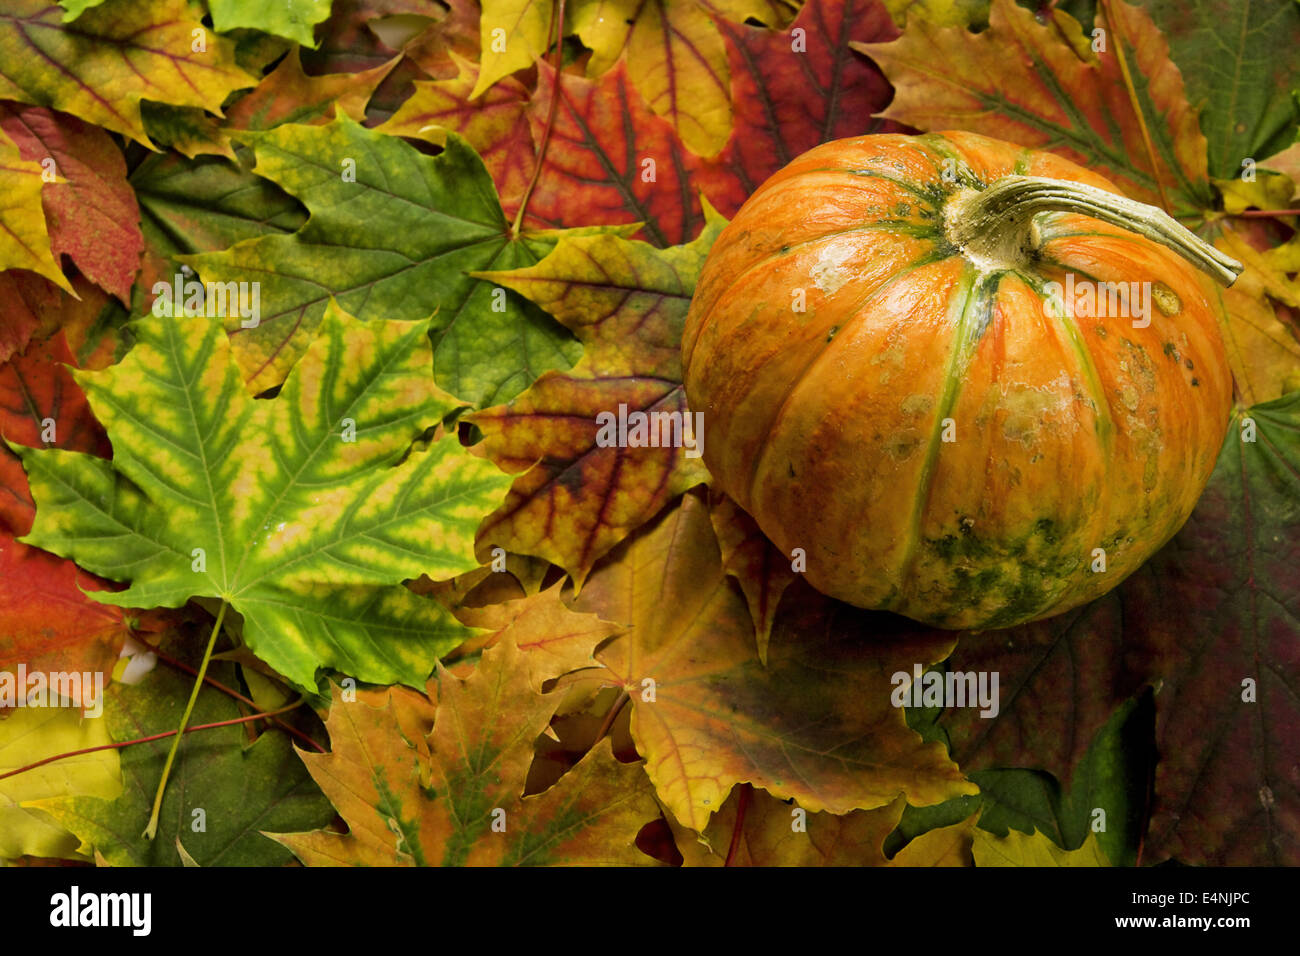 pumpkin on top of bright autumn leaves Stock Photo